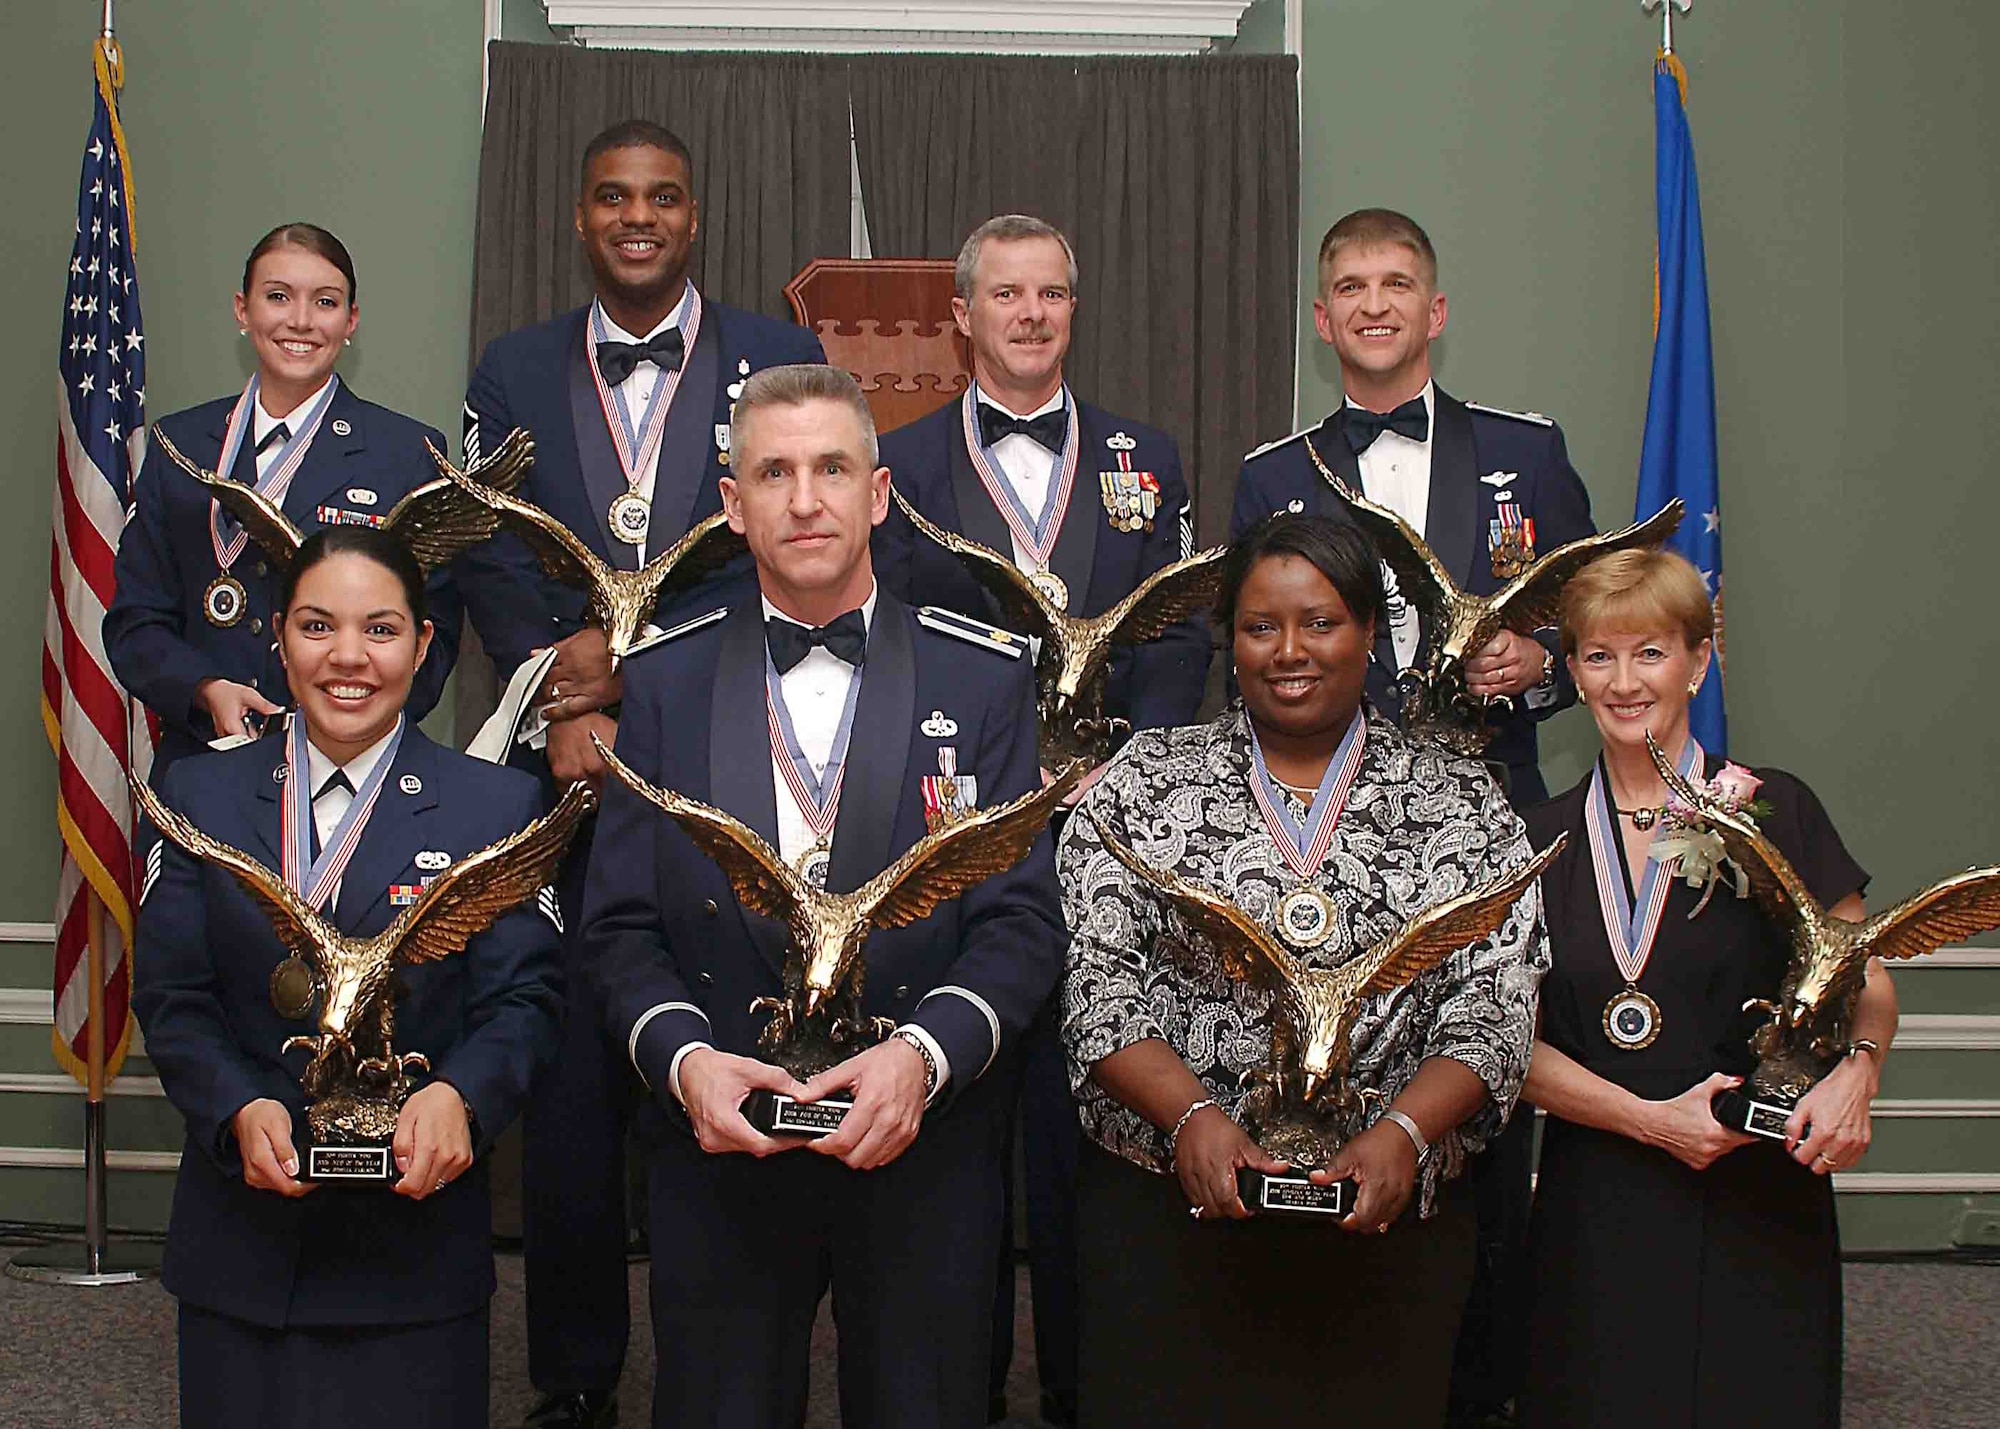 SHAW AIR FORCE BASE, S.C. -- The 20th Fighter Wing presents its annual award winners Feb. 9 at a ceremony in Carolina Skies. First row, from left: Staff Sgt. Othelia Carlson, 20th Communications Squadron, 20th FW NCO of the Year; Maj. Edward Earhart, 20th Equipment Maintenance Squadron, 20th FW Field Grade Officer of the Year; Sharla Pope, 20th Comptroller Squadron, 20th FW Civilian Employee of the Year for GS-6 or WG-7 employees and below, and Anne Baker, 20th Contracting Squadron, 20th FW Civilian Employee of the Year for GS-7 or WG- 8 employees and above. Second row, from left: Airman 1st Class Crystal Moore, 20th Security Forces Squadron, 20th FW Airman of the Year; Master Sgt. James Powell III, 20th Aeromedical-Dental Squadron, 20th FW Senior NCO of the Year; Master Sgt. John Walker, 20th SFS, 20th FW First Sergeant of the Year, and Lt. Col. Stephen Higgins, 20th Medical Group deputy commander, accepting the 20th FW Company Grade Officer of the Year award on behlaf of Capt. Kourtney Shaw, 20th AMDS. (U.S. Air Force photo/Staff Sgt. Nathan Brevier)

                               